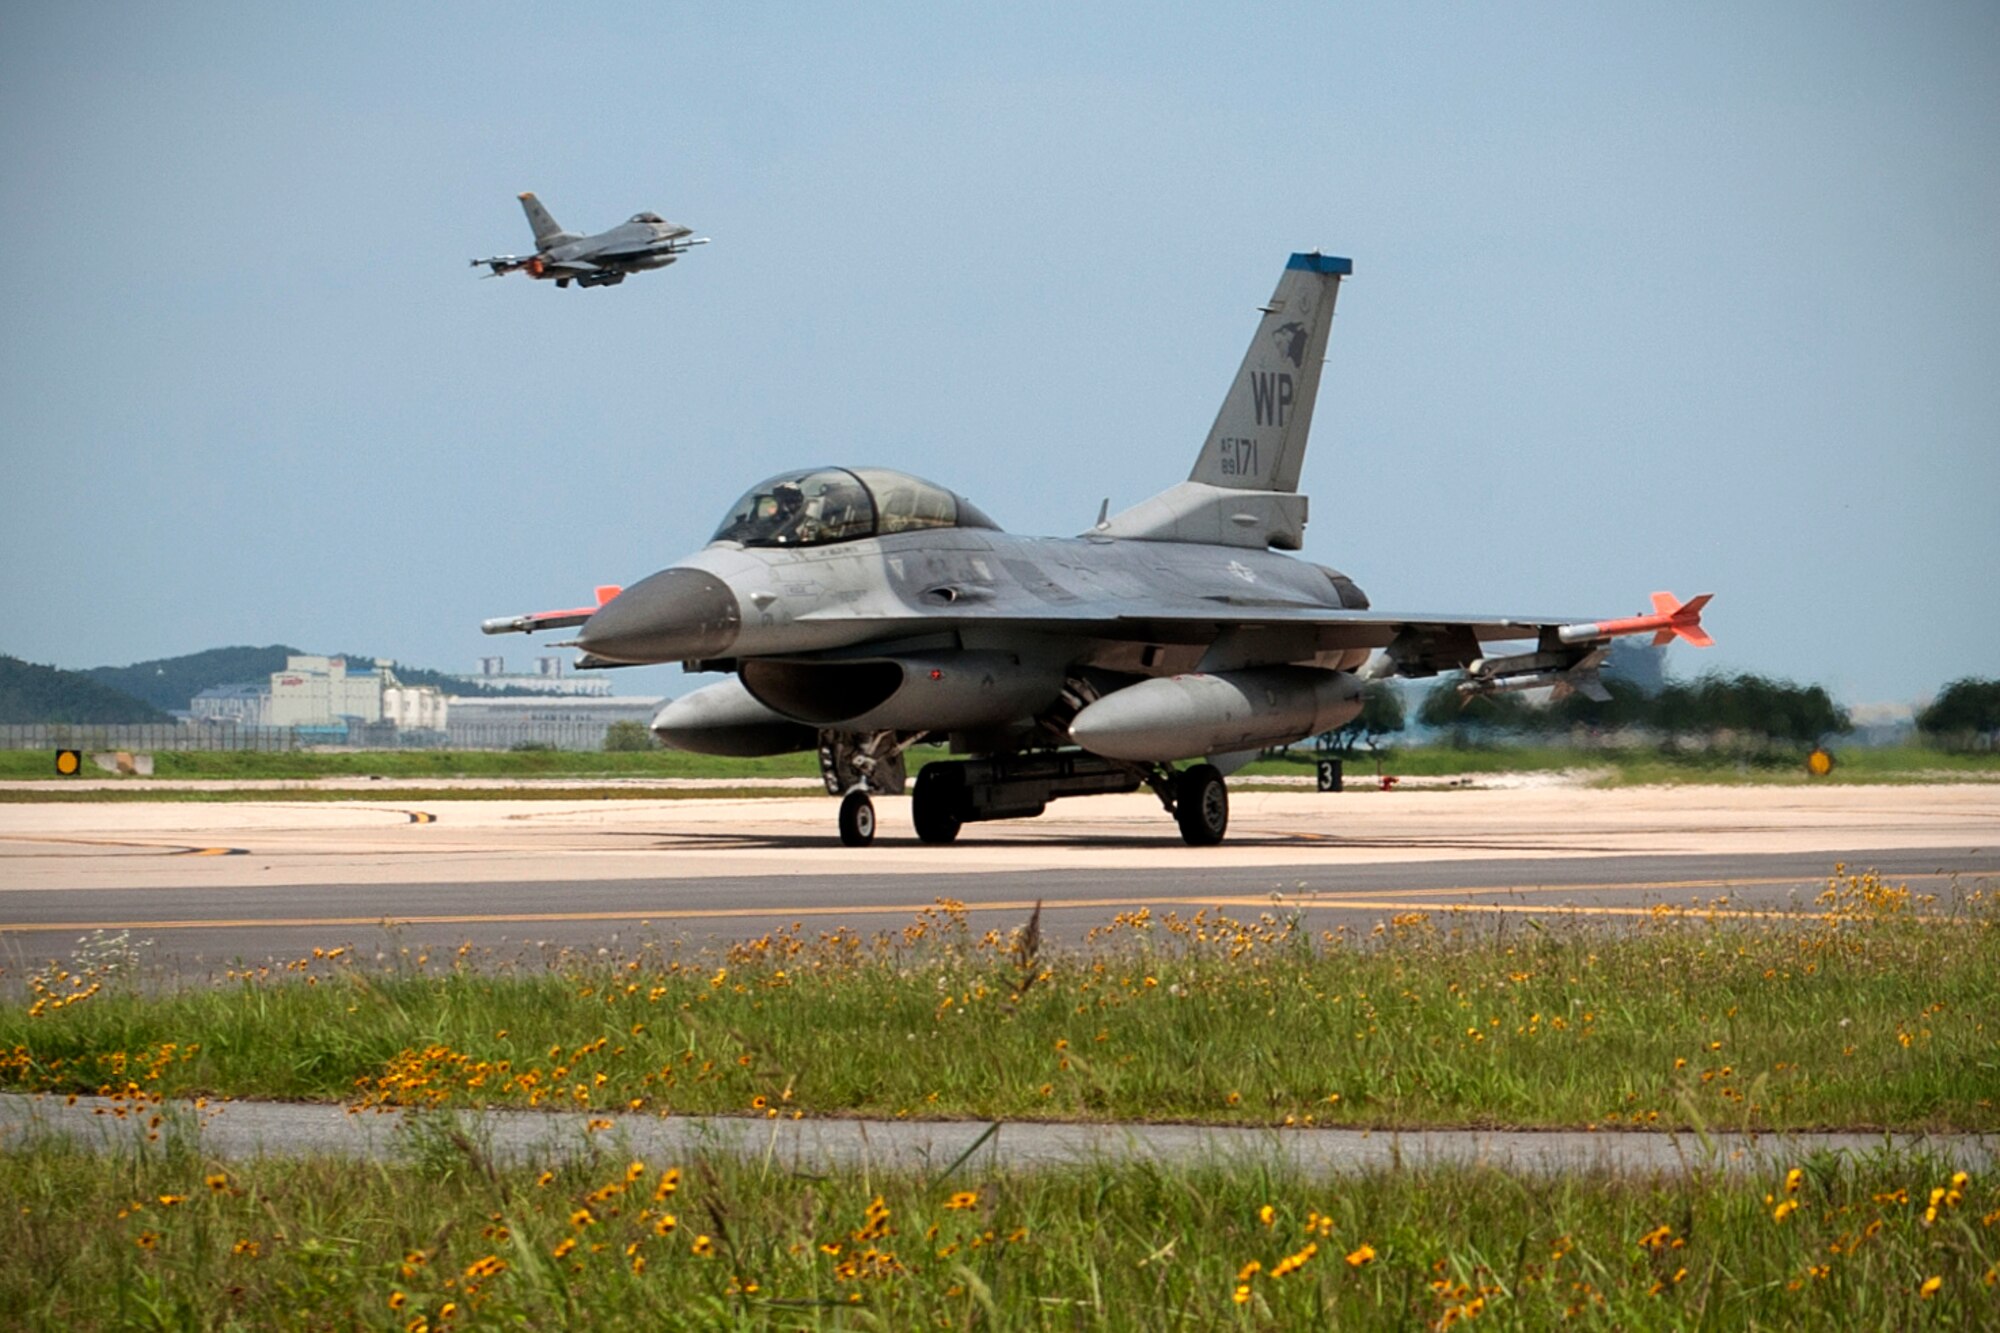 A U.S. Air Force 35th Fighter Squadron F-16 Fighting Falcon taxis on the Kunsan Air Base runway as an 80th Fighter Squadron F-16 Fighting Falcon takes off during Exercise Buddy Wing 15-4 at Kunsan Air Base, Republic of Korea, July 16, 2015. The five-day quarterly operational readiness exercise enhanced strategic capabilities at Kunsan by generating combat airpower in a simulated chemical, biological, radiological, nuclear and high-yield explosive environment. (U.S. Air Force photo by Senior Airman Katrina Heikkinen/Released)